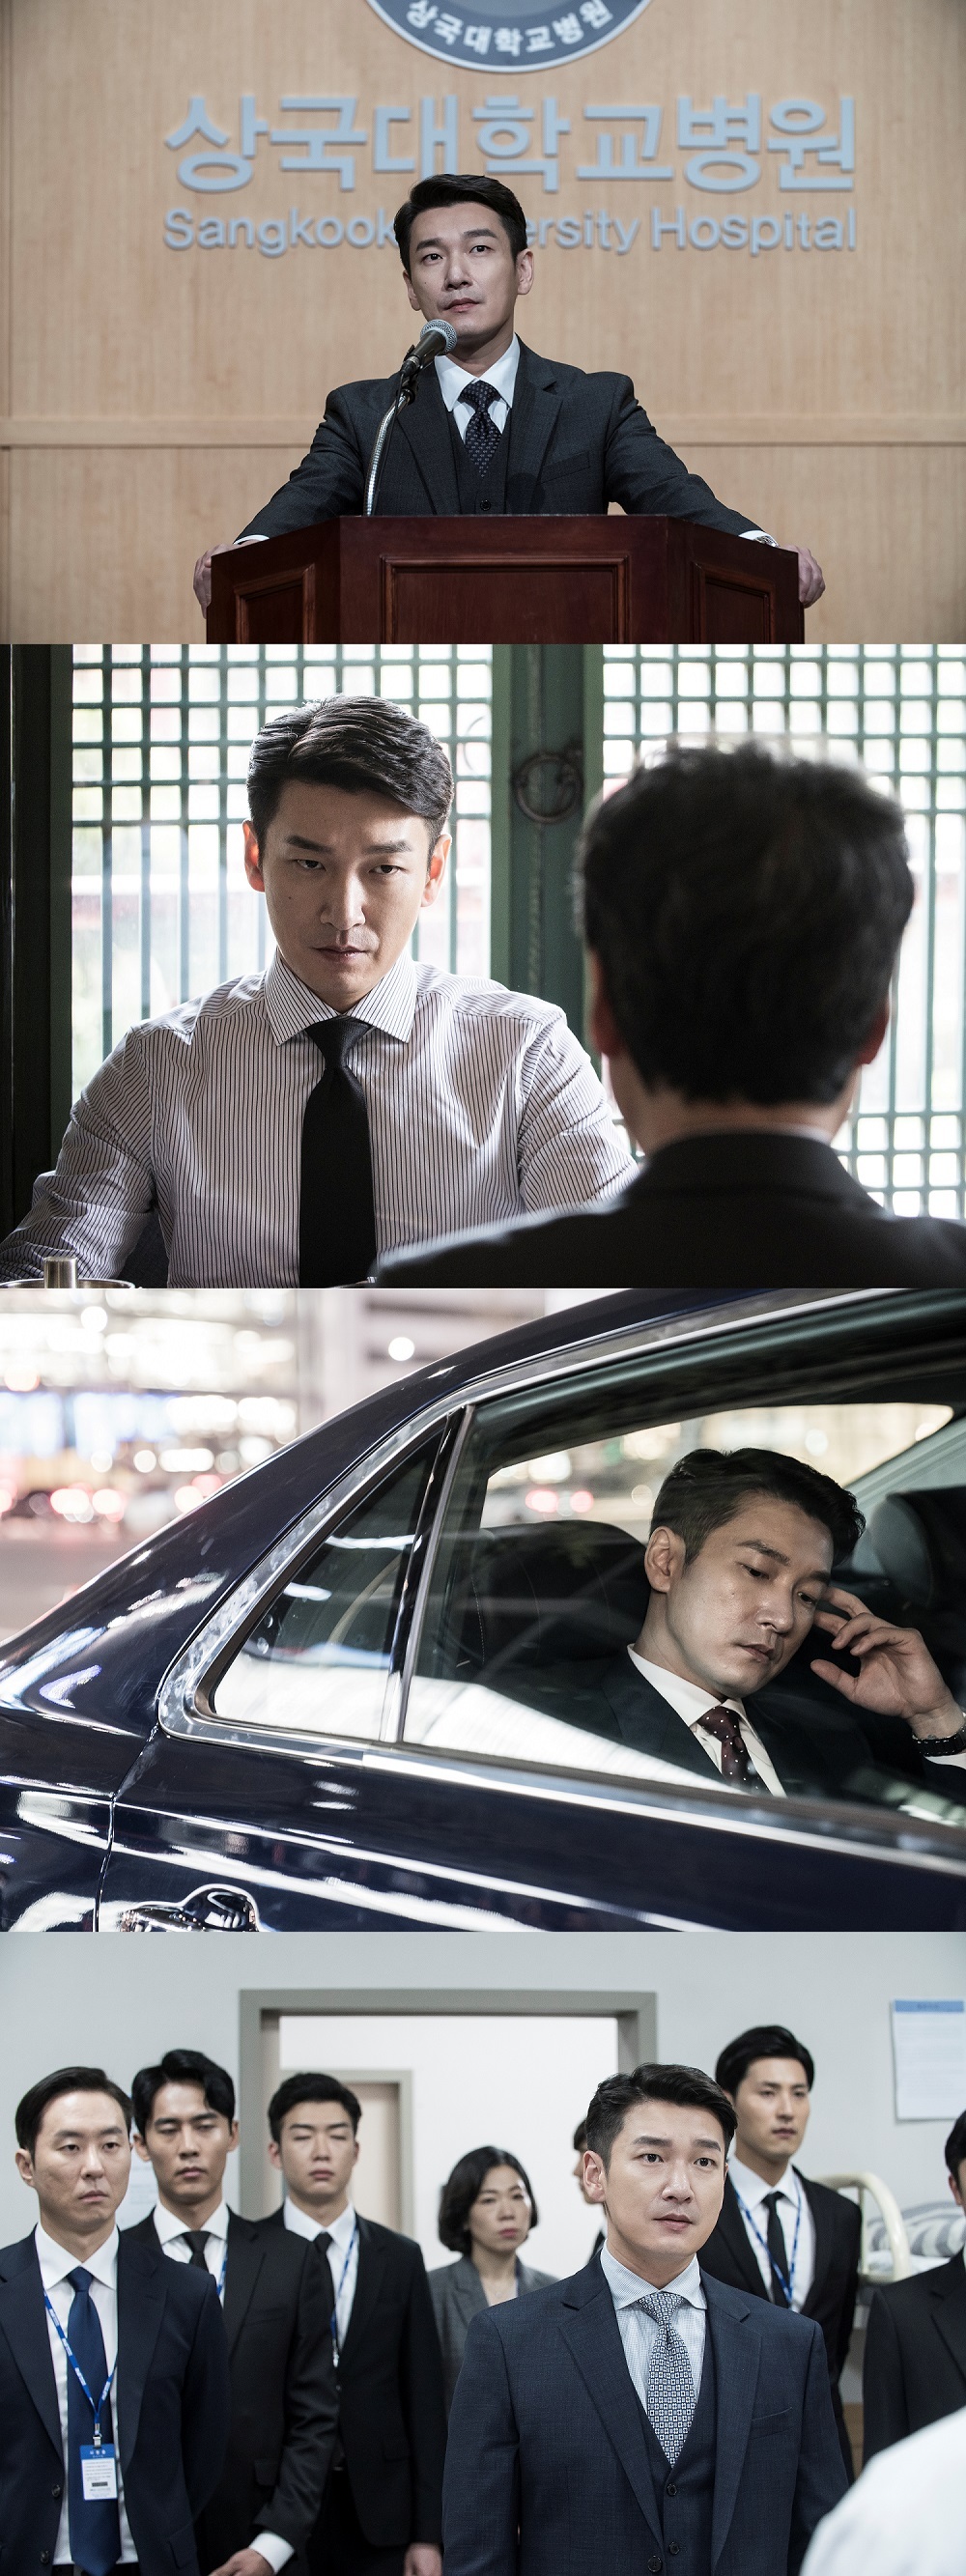 JTBCs monthly drama Life (director Hong Jong-chan Lim Hyun-wook, and the plays Soo Yeon Lee) released Jo Seung-woos first Steel Series, which transforms into a cool-headed winner Koo Seung-hyo and emits an overwhelming aura.Life depicts the story of a violent antigen reaction in our bodies, where the beliefs of those who want to protect and those who want to change clash in various groups in the hospital.It predicts the birth of a well-made medical drama with a different level of detail and density, including Lee Dong-wook, who values the doctors beliefs, and Jo Seung-hyo, a cool-headed winner whose numbers are important, and the psychology of the characters surrounding him.Jo Seung-woo, who will once again join forces with Soo Yeon Lee writer following the Secret Forest, has already completed the pre-heating of expectations by radiating a Charisma that can not be encountered with teaser images and posters.The first SteelSeries to be released turns viewers expectations into confidence.The presence of filling the screen with only the sharp eyes that penetrate the opponent is enough to create the admiration of Jo Seung-woo.Charisma, sharp and cool, which makes even the air freeze, overwhelms the viewers.A neat suit pit that does not allow any error reveals the identity of Koo Seung-hyo created by Jo Seung-woo.The Charisma of Gu Seung Hyo, which emits a unique force among many people surrounding him, is possible because he has a firm belief.Koo Seung-hyo, who does not lose his spare time even in a tense nervous battle with doctors, predicts a strong wind that will shake the hospital.Because Jo Seung-woo is possible, the immersion stimulates the desire of the main shooter.Koo Seung-hyo, played by Jo Seung-woo, is a cool-headed winner with important numbers.As a person who constantly envisions business direction and predicts and prepares for the situation to come to Plan B, Koo Seung-hyo, who has won the groups youngest CEO, will be at the center of a strong wave as the general manager of NTU Hospital Metro Station, which deals with peoples lives.Jo Seung-woo, who predicts another acting transform, said, Koo Seung-hyo is not easy to define as one.Surprisingly, there is humanity, and the ability to look at reality is excellent, but it is a person who has lived a curved life.I think that life will be a drama with a wider social meaning, not just a medical drama that can be seen in hospitals, said Koo Seung-hyo, who is not in business and money at the NTU Hospital Metro station in the country.The actor is a sharp acting force that coordinates tension and emits an overwhelming aura every moment.I will also admire Jo Seung-woo, he said. I can expect another performance transform of Jo Seung-woo, who has his own color on the character of Koo Seung-hyo, who is not easy to define.Meanwhile, Life coincided with Soo Yeon Lee, who opened a new chapter of genres with Secret Forest, and Hong Jong-chan, who was well received for his delicate production in The Most Beautiful Breakup in the World, including Lee Dong-wook, Jo Seung-woo, Won Jin-ah, Lee Kyu-hyung, Yoo Jae-myeong, Moon So-ri, Moon Sung-geun, Chun Ho-jin, Taein Actors from solid insiders such as Ho and Yeom Hye-ran have completed the worlds most perfect Trusted Dream Team, drawing keen attention as the best anticipated work of 2018.Life will be broadcast for the first time on JTBC at 11 pm on the 23rd following Miss Hammurabi.